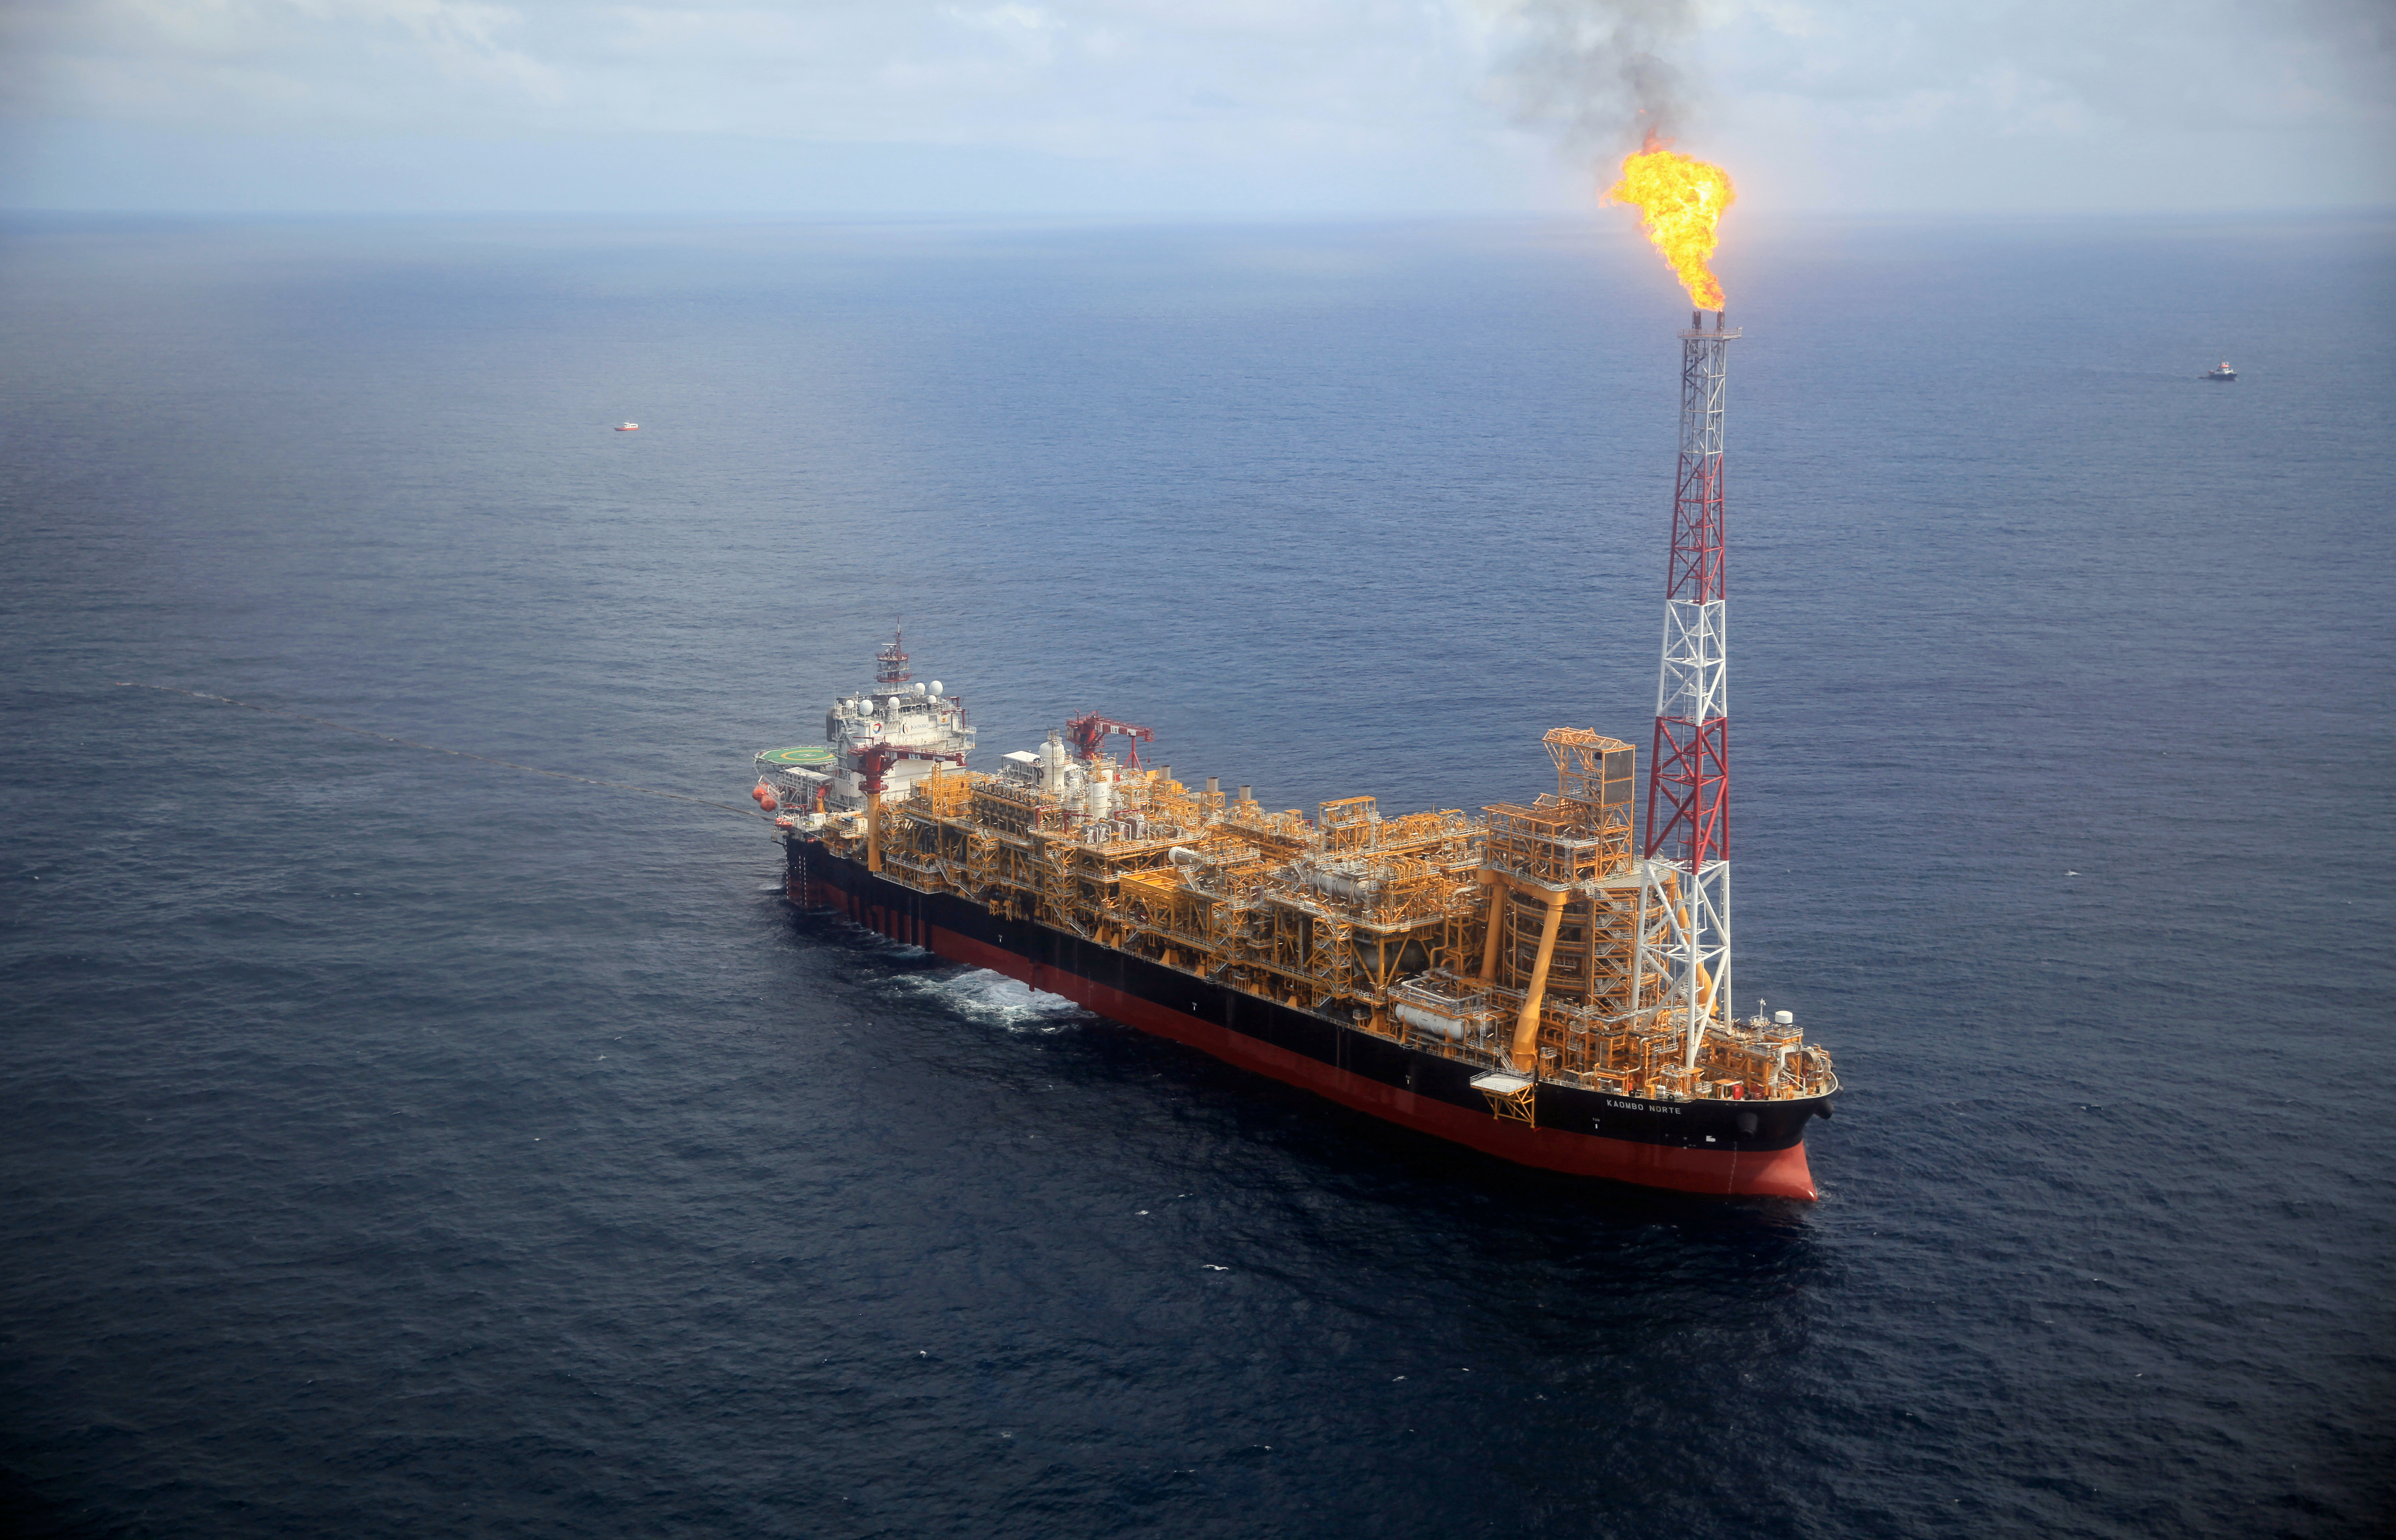 Kaombo Norte floating oil platform is seen from a helicopter off the coast of Angola